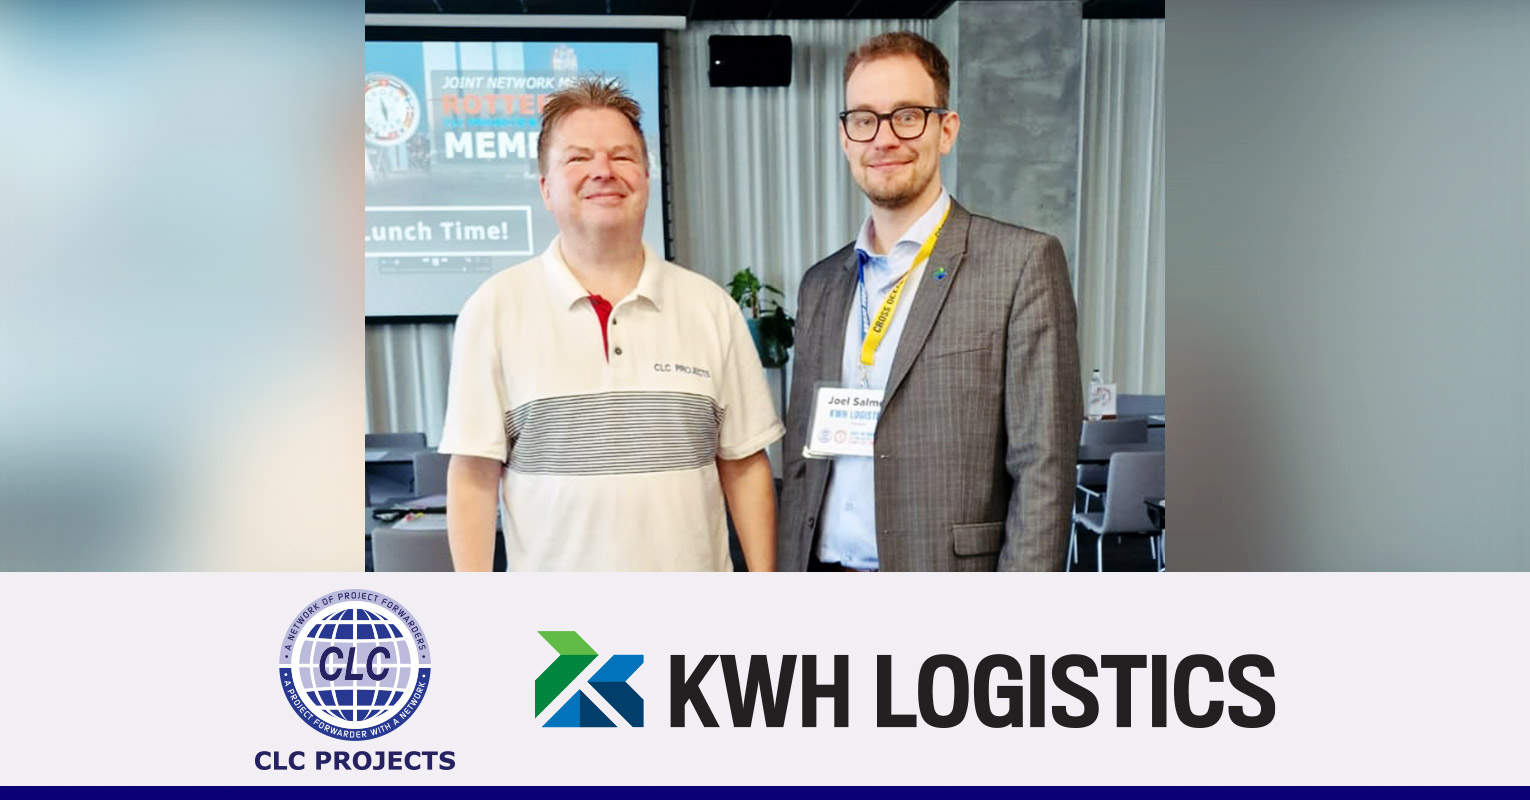 Joel Salmela of KWH Logistics and CLC Projects Chairman at joint network meeting in Rotterdam